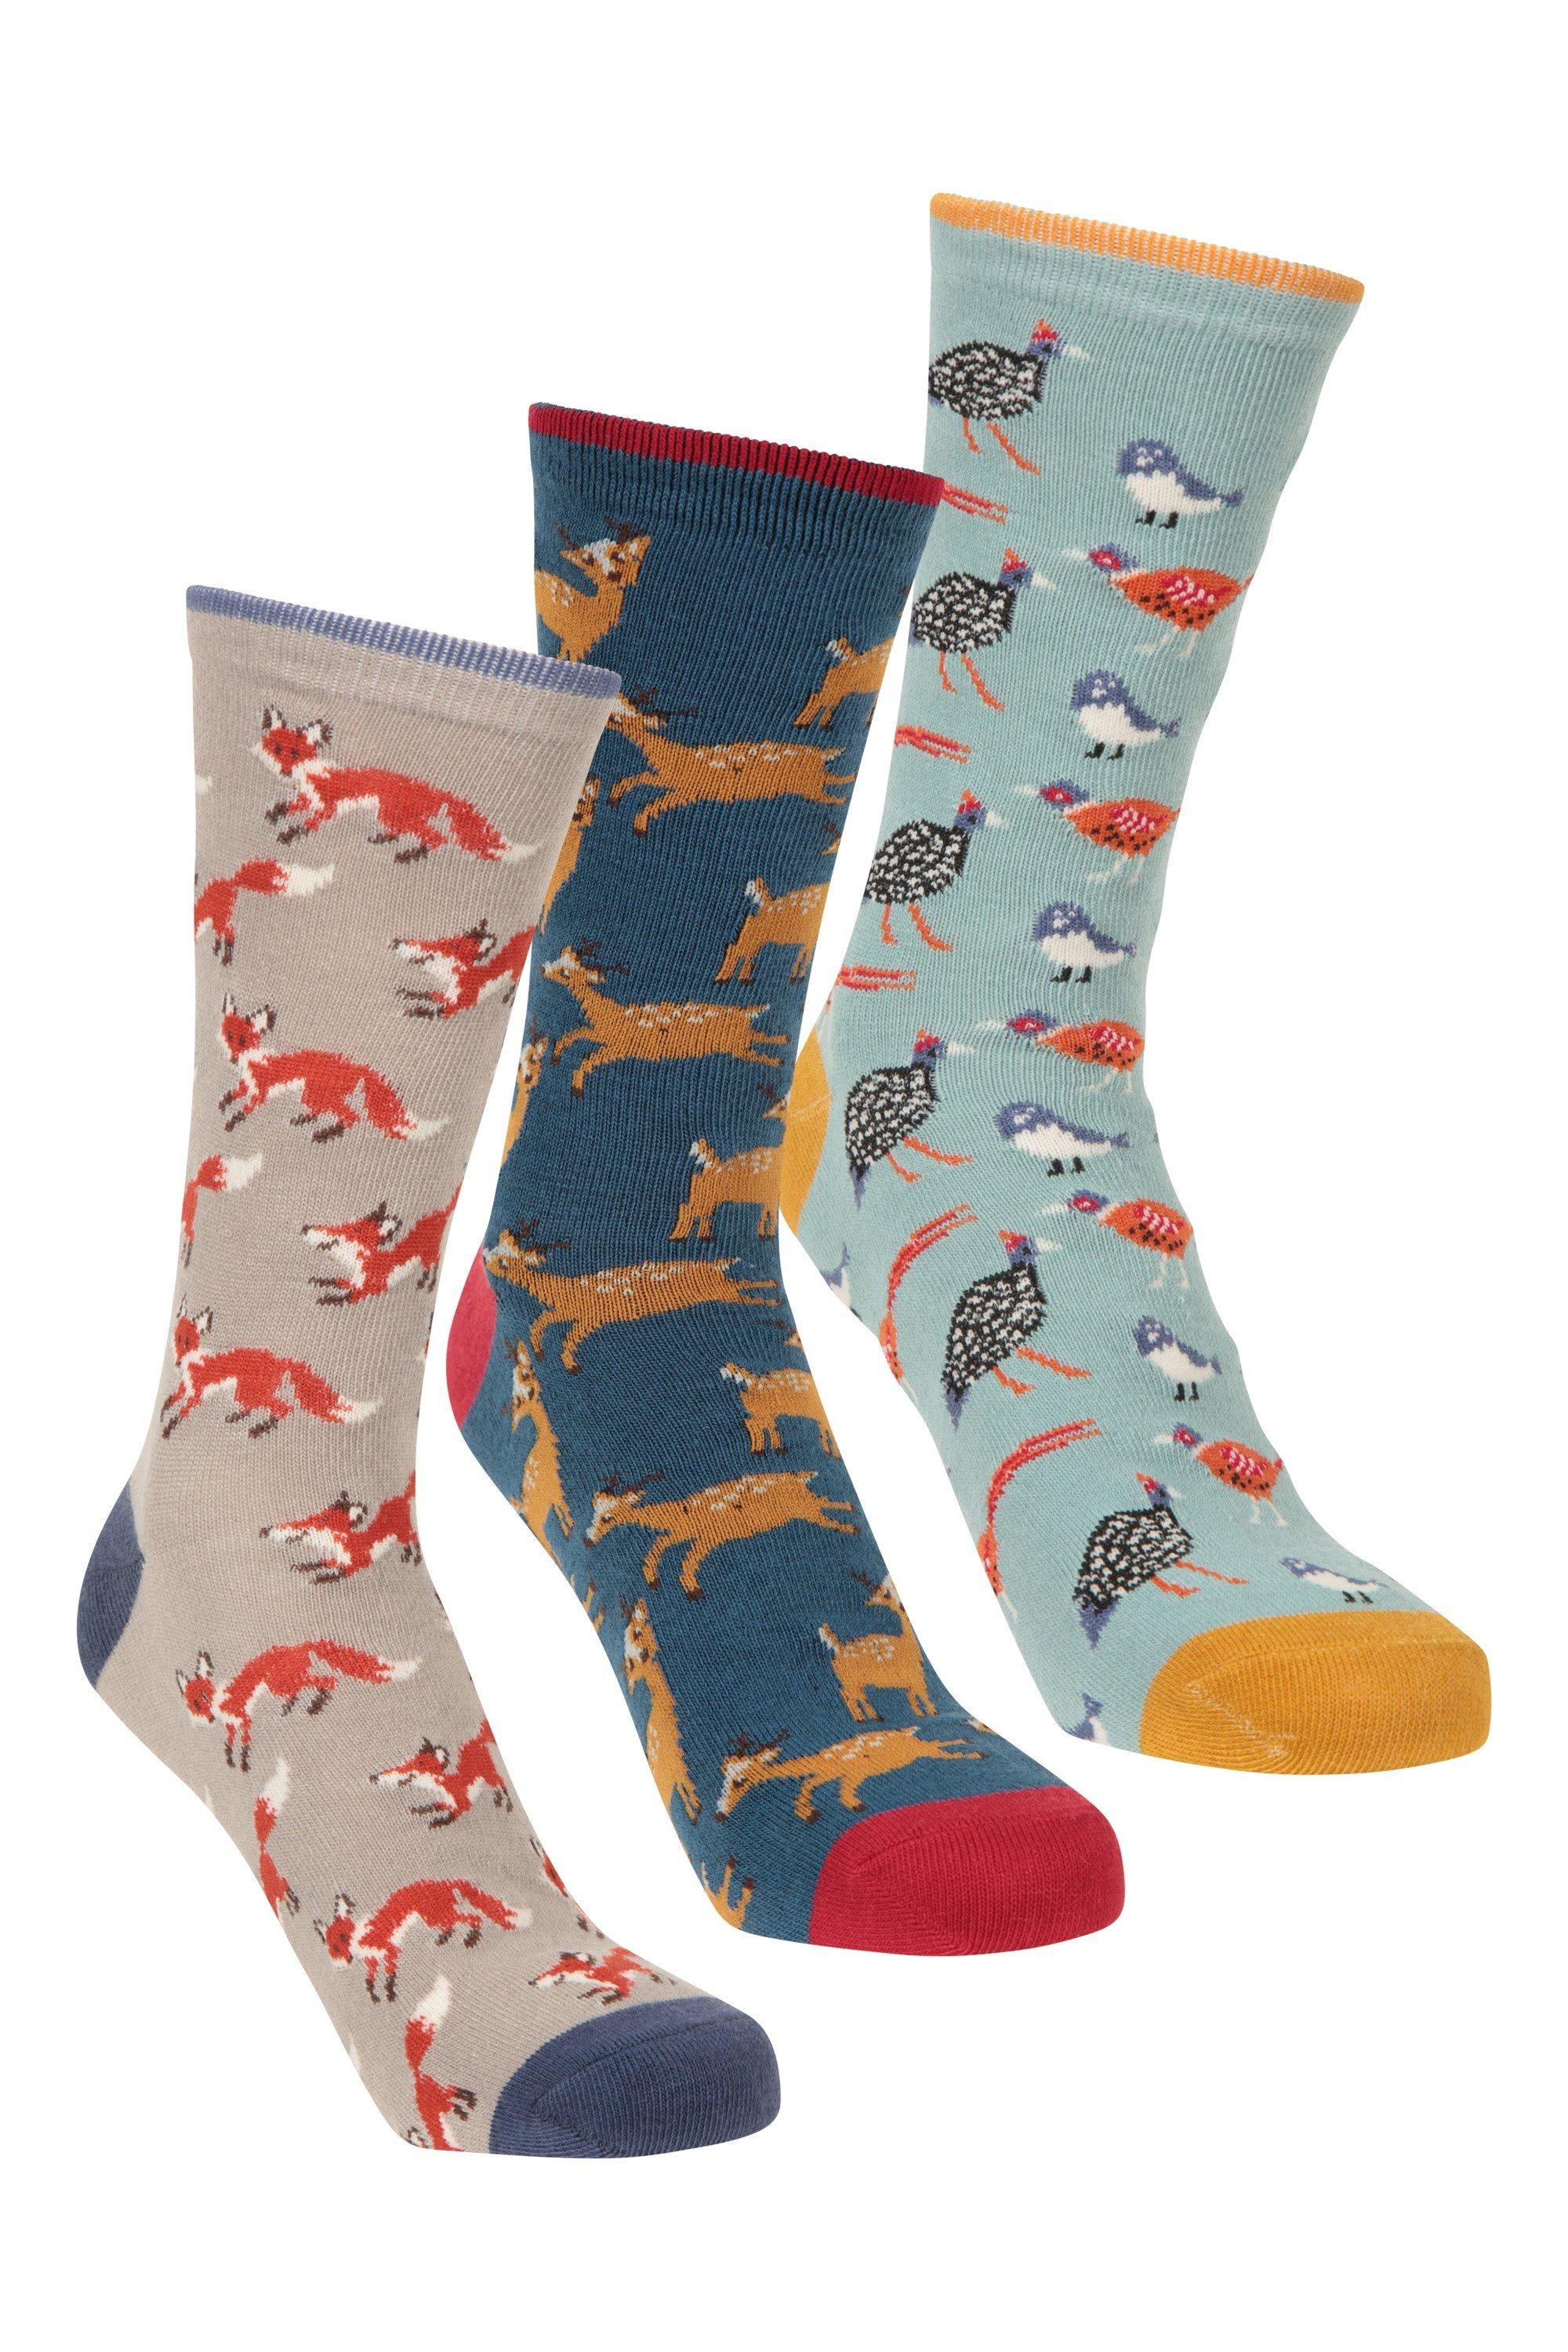 Socks Patterned Design Mid Calf Recycled Sock Pack of 3